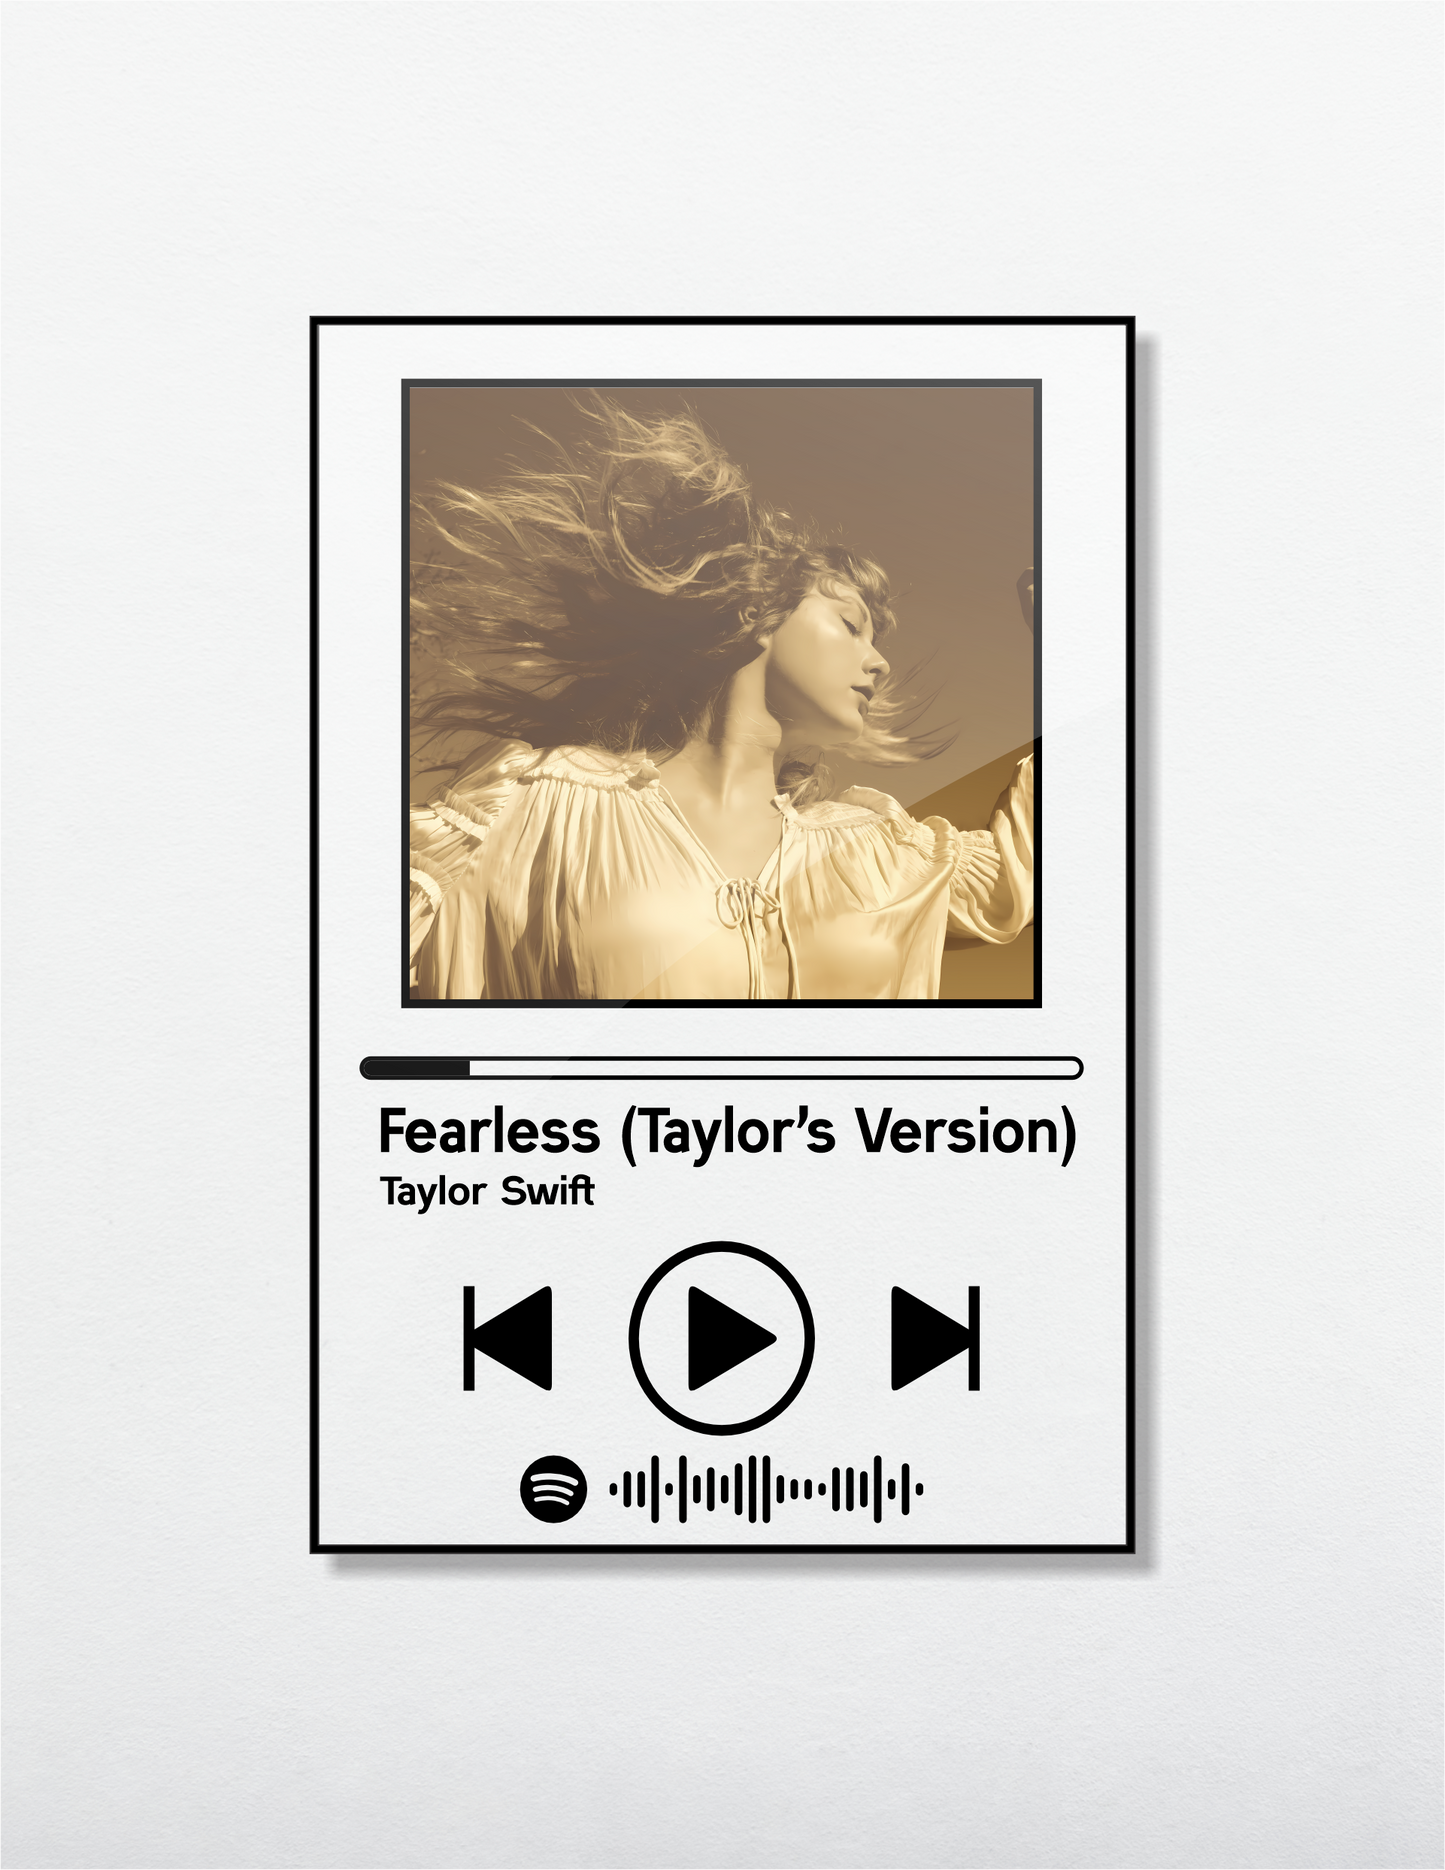 Fearless (Taylor's Version) of Taylor Swift Acrylic Album art. Music themed Wall Art